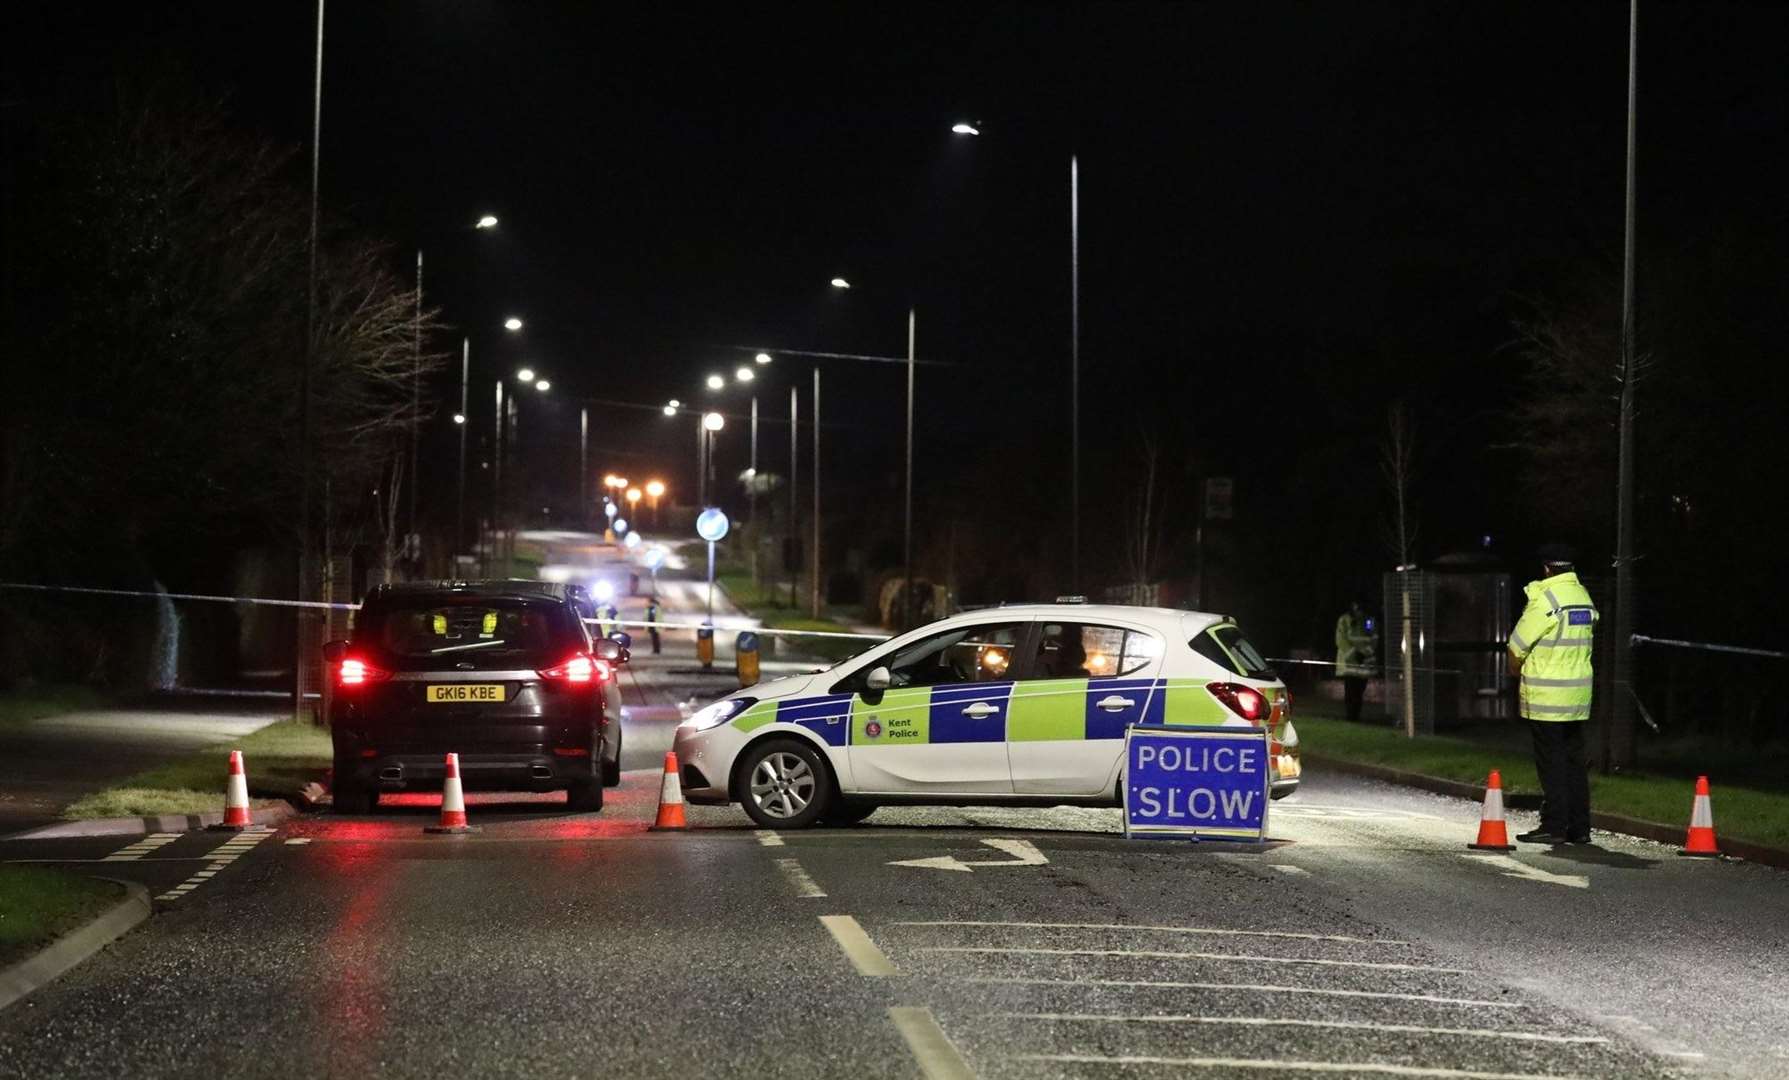 New Dover Road was closed off by police following the collision. Picture: UKNIP